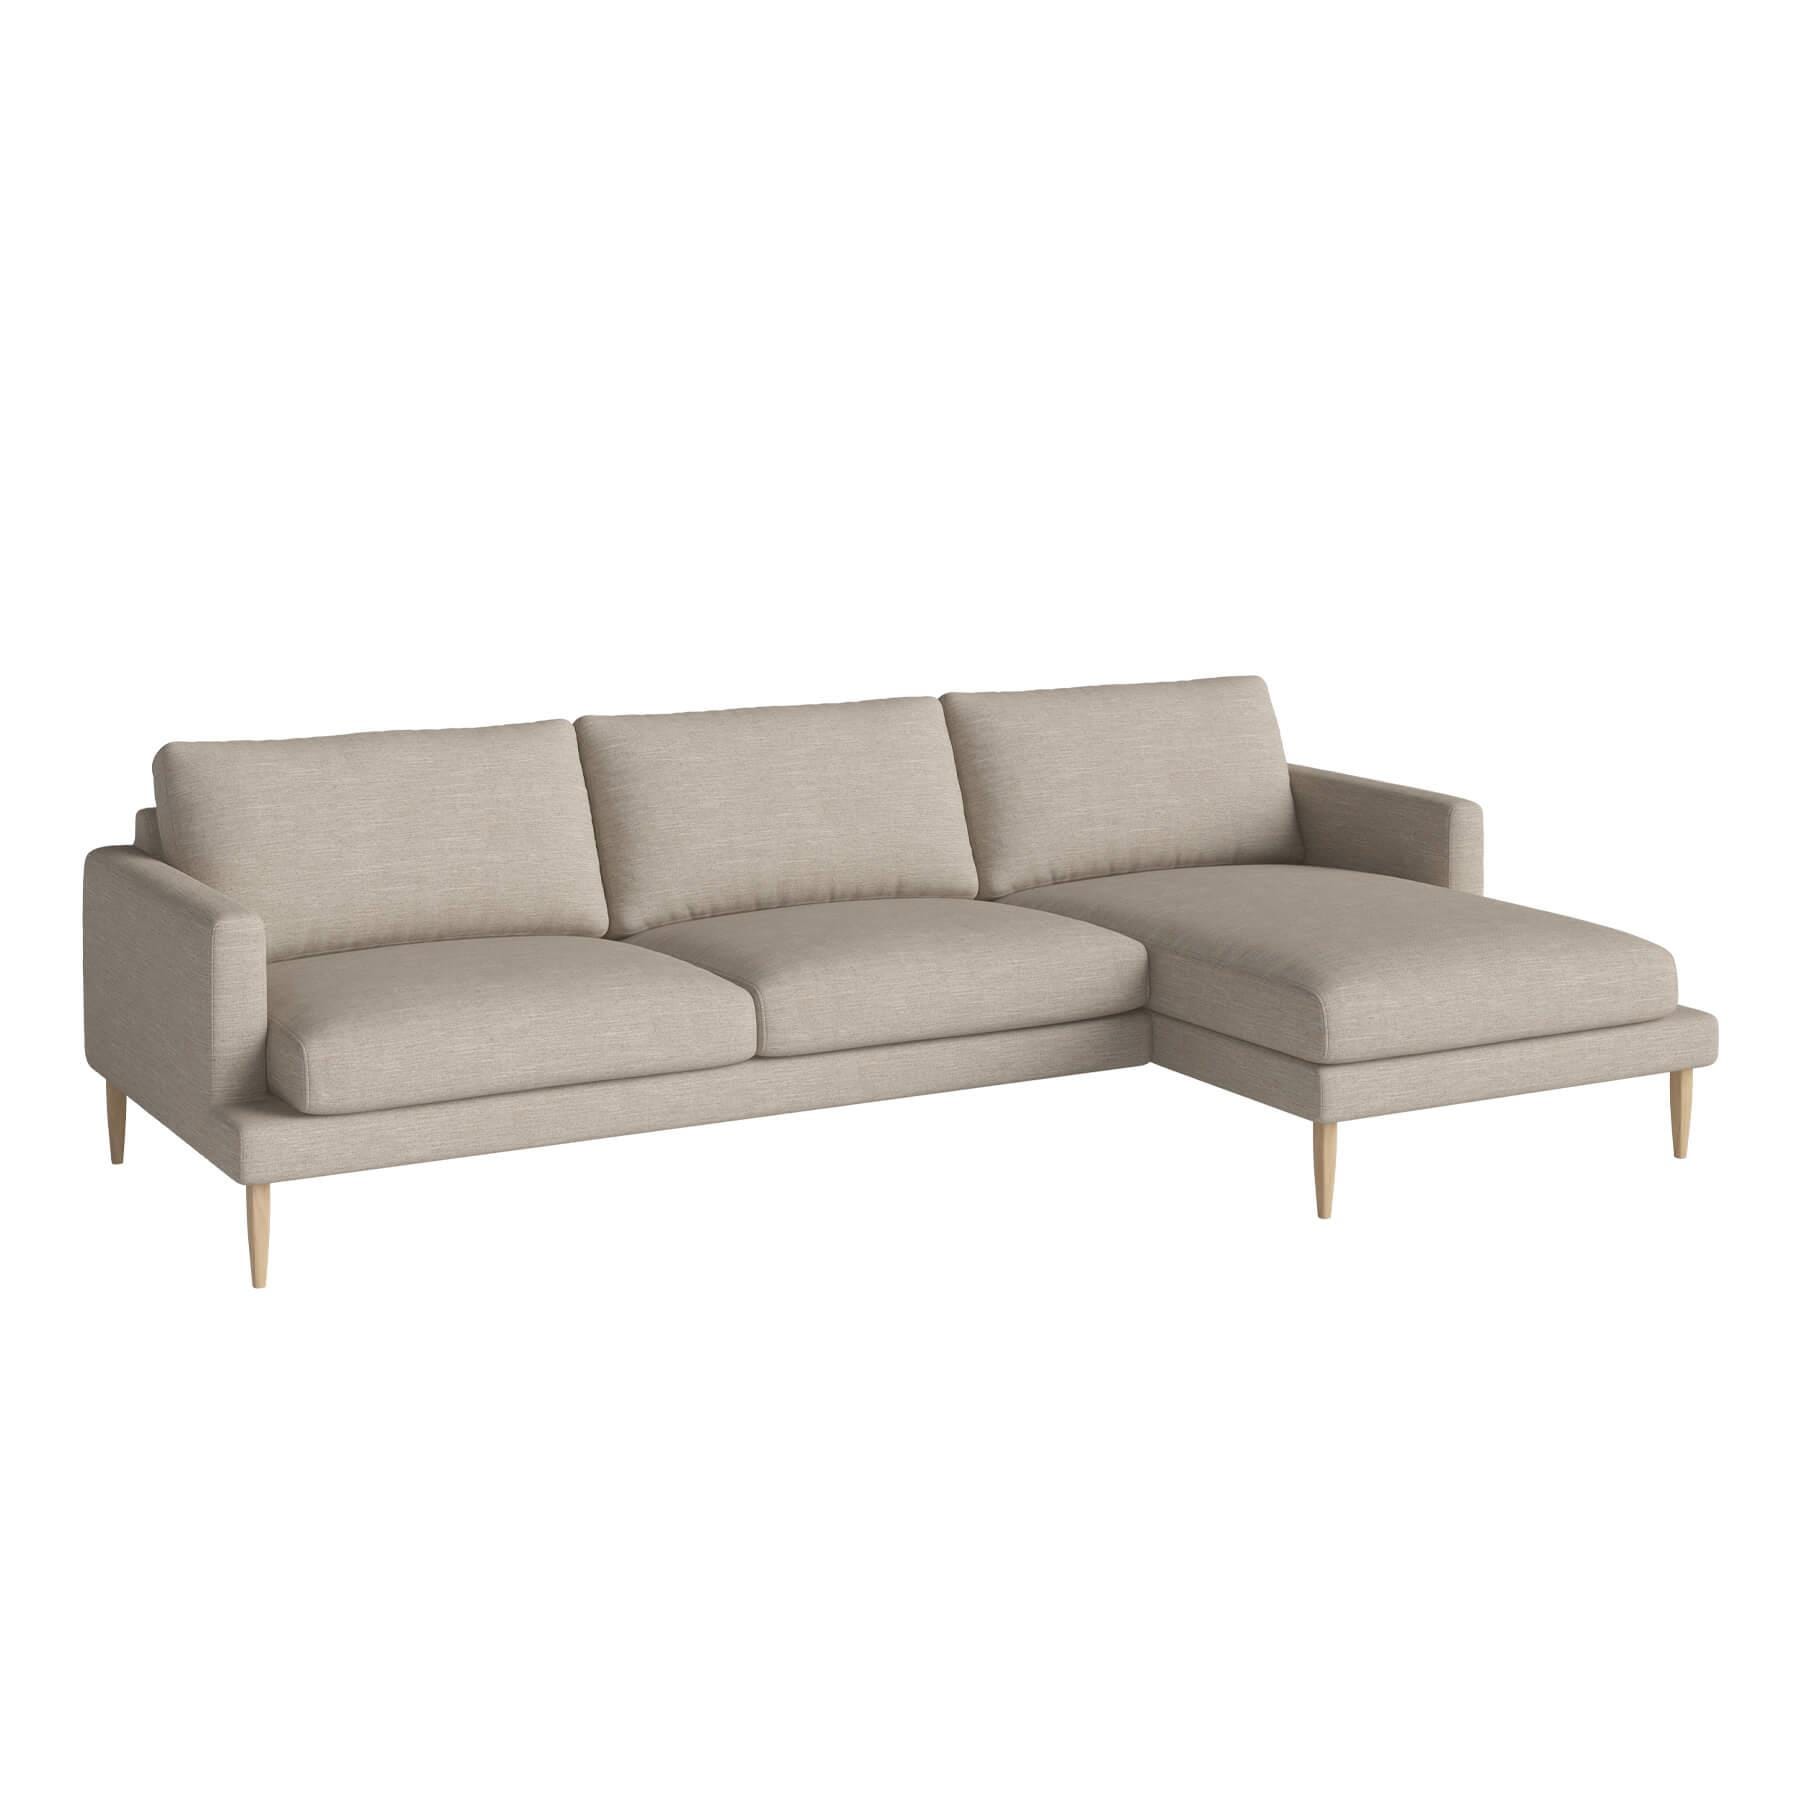 Bolia Veneda Sofa 35 Seater Sofa With Chaise Longue White Oiled Oak Baize Sand Right Brown Designer Furniture From Holloways Of Ludlow